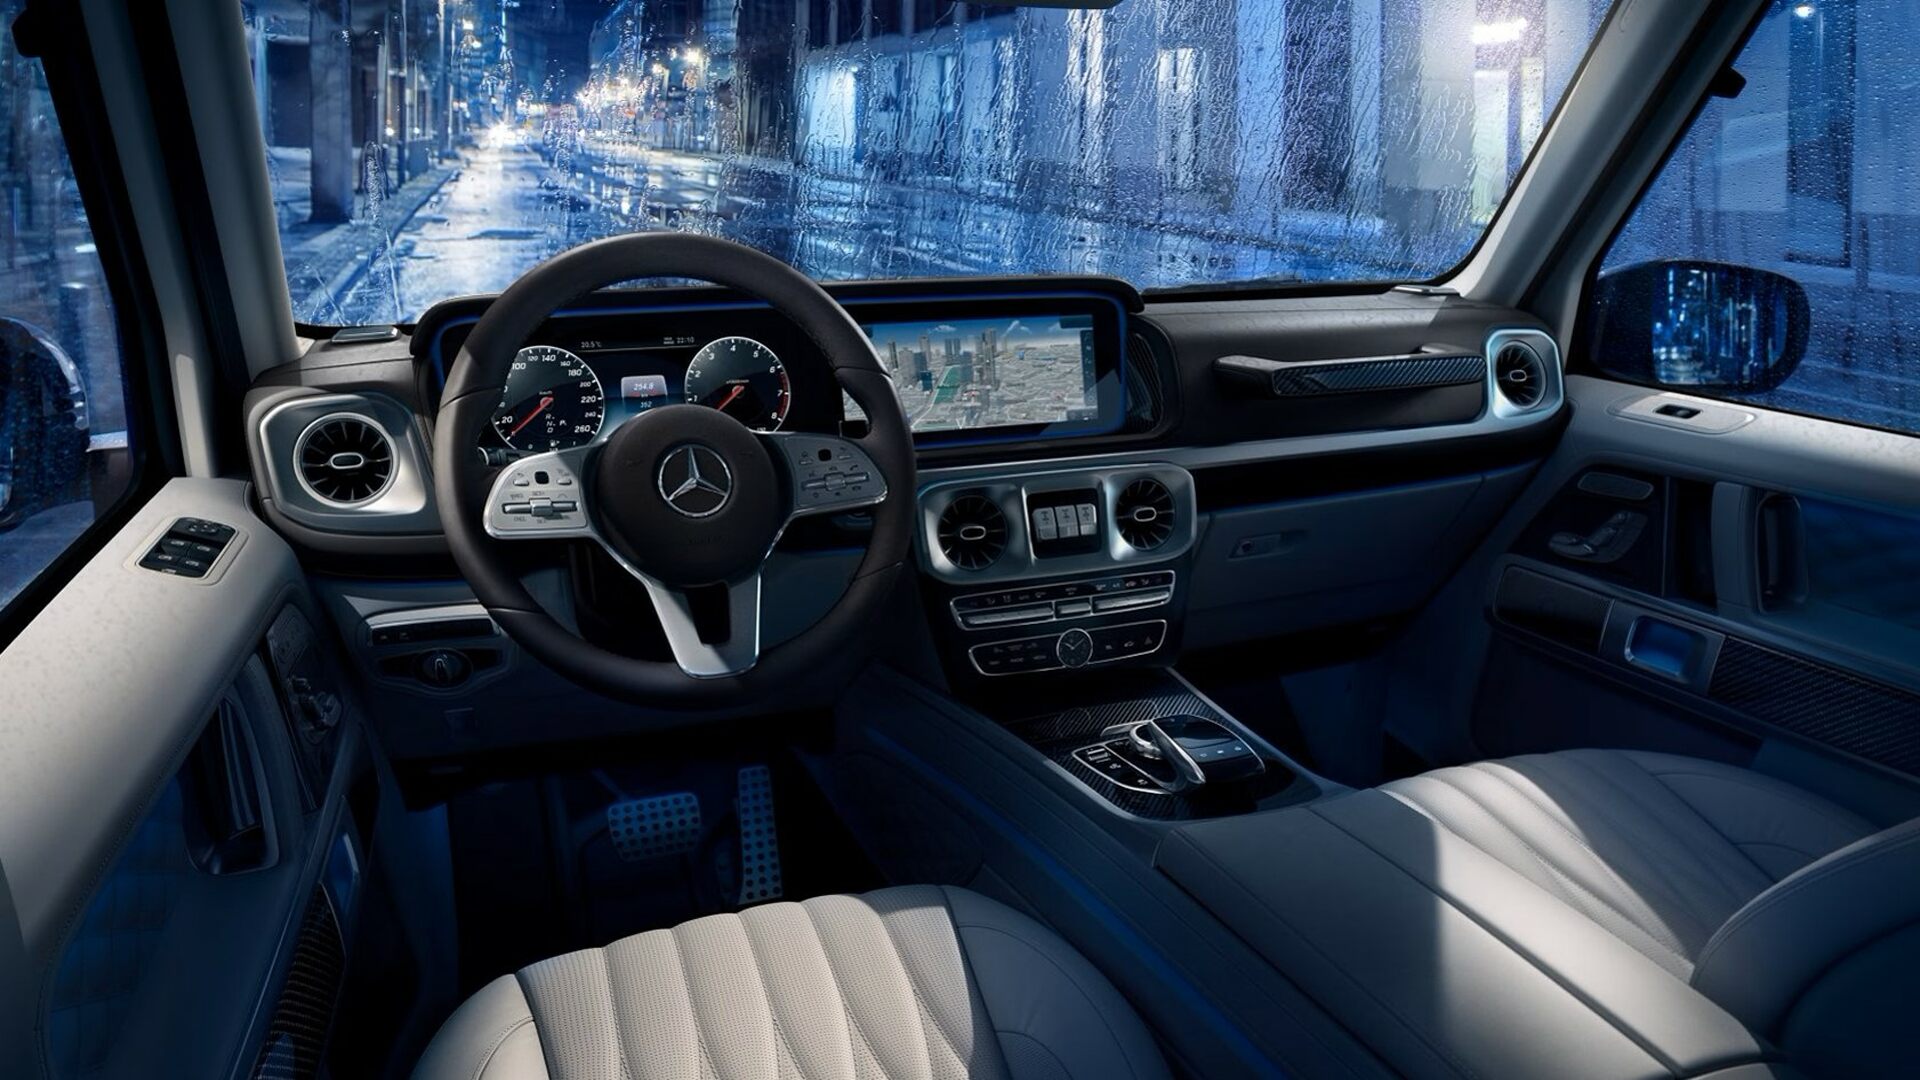 The Interior, Steering, Dashboard, And Central Console Of A Mercedes-Benz G550